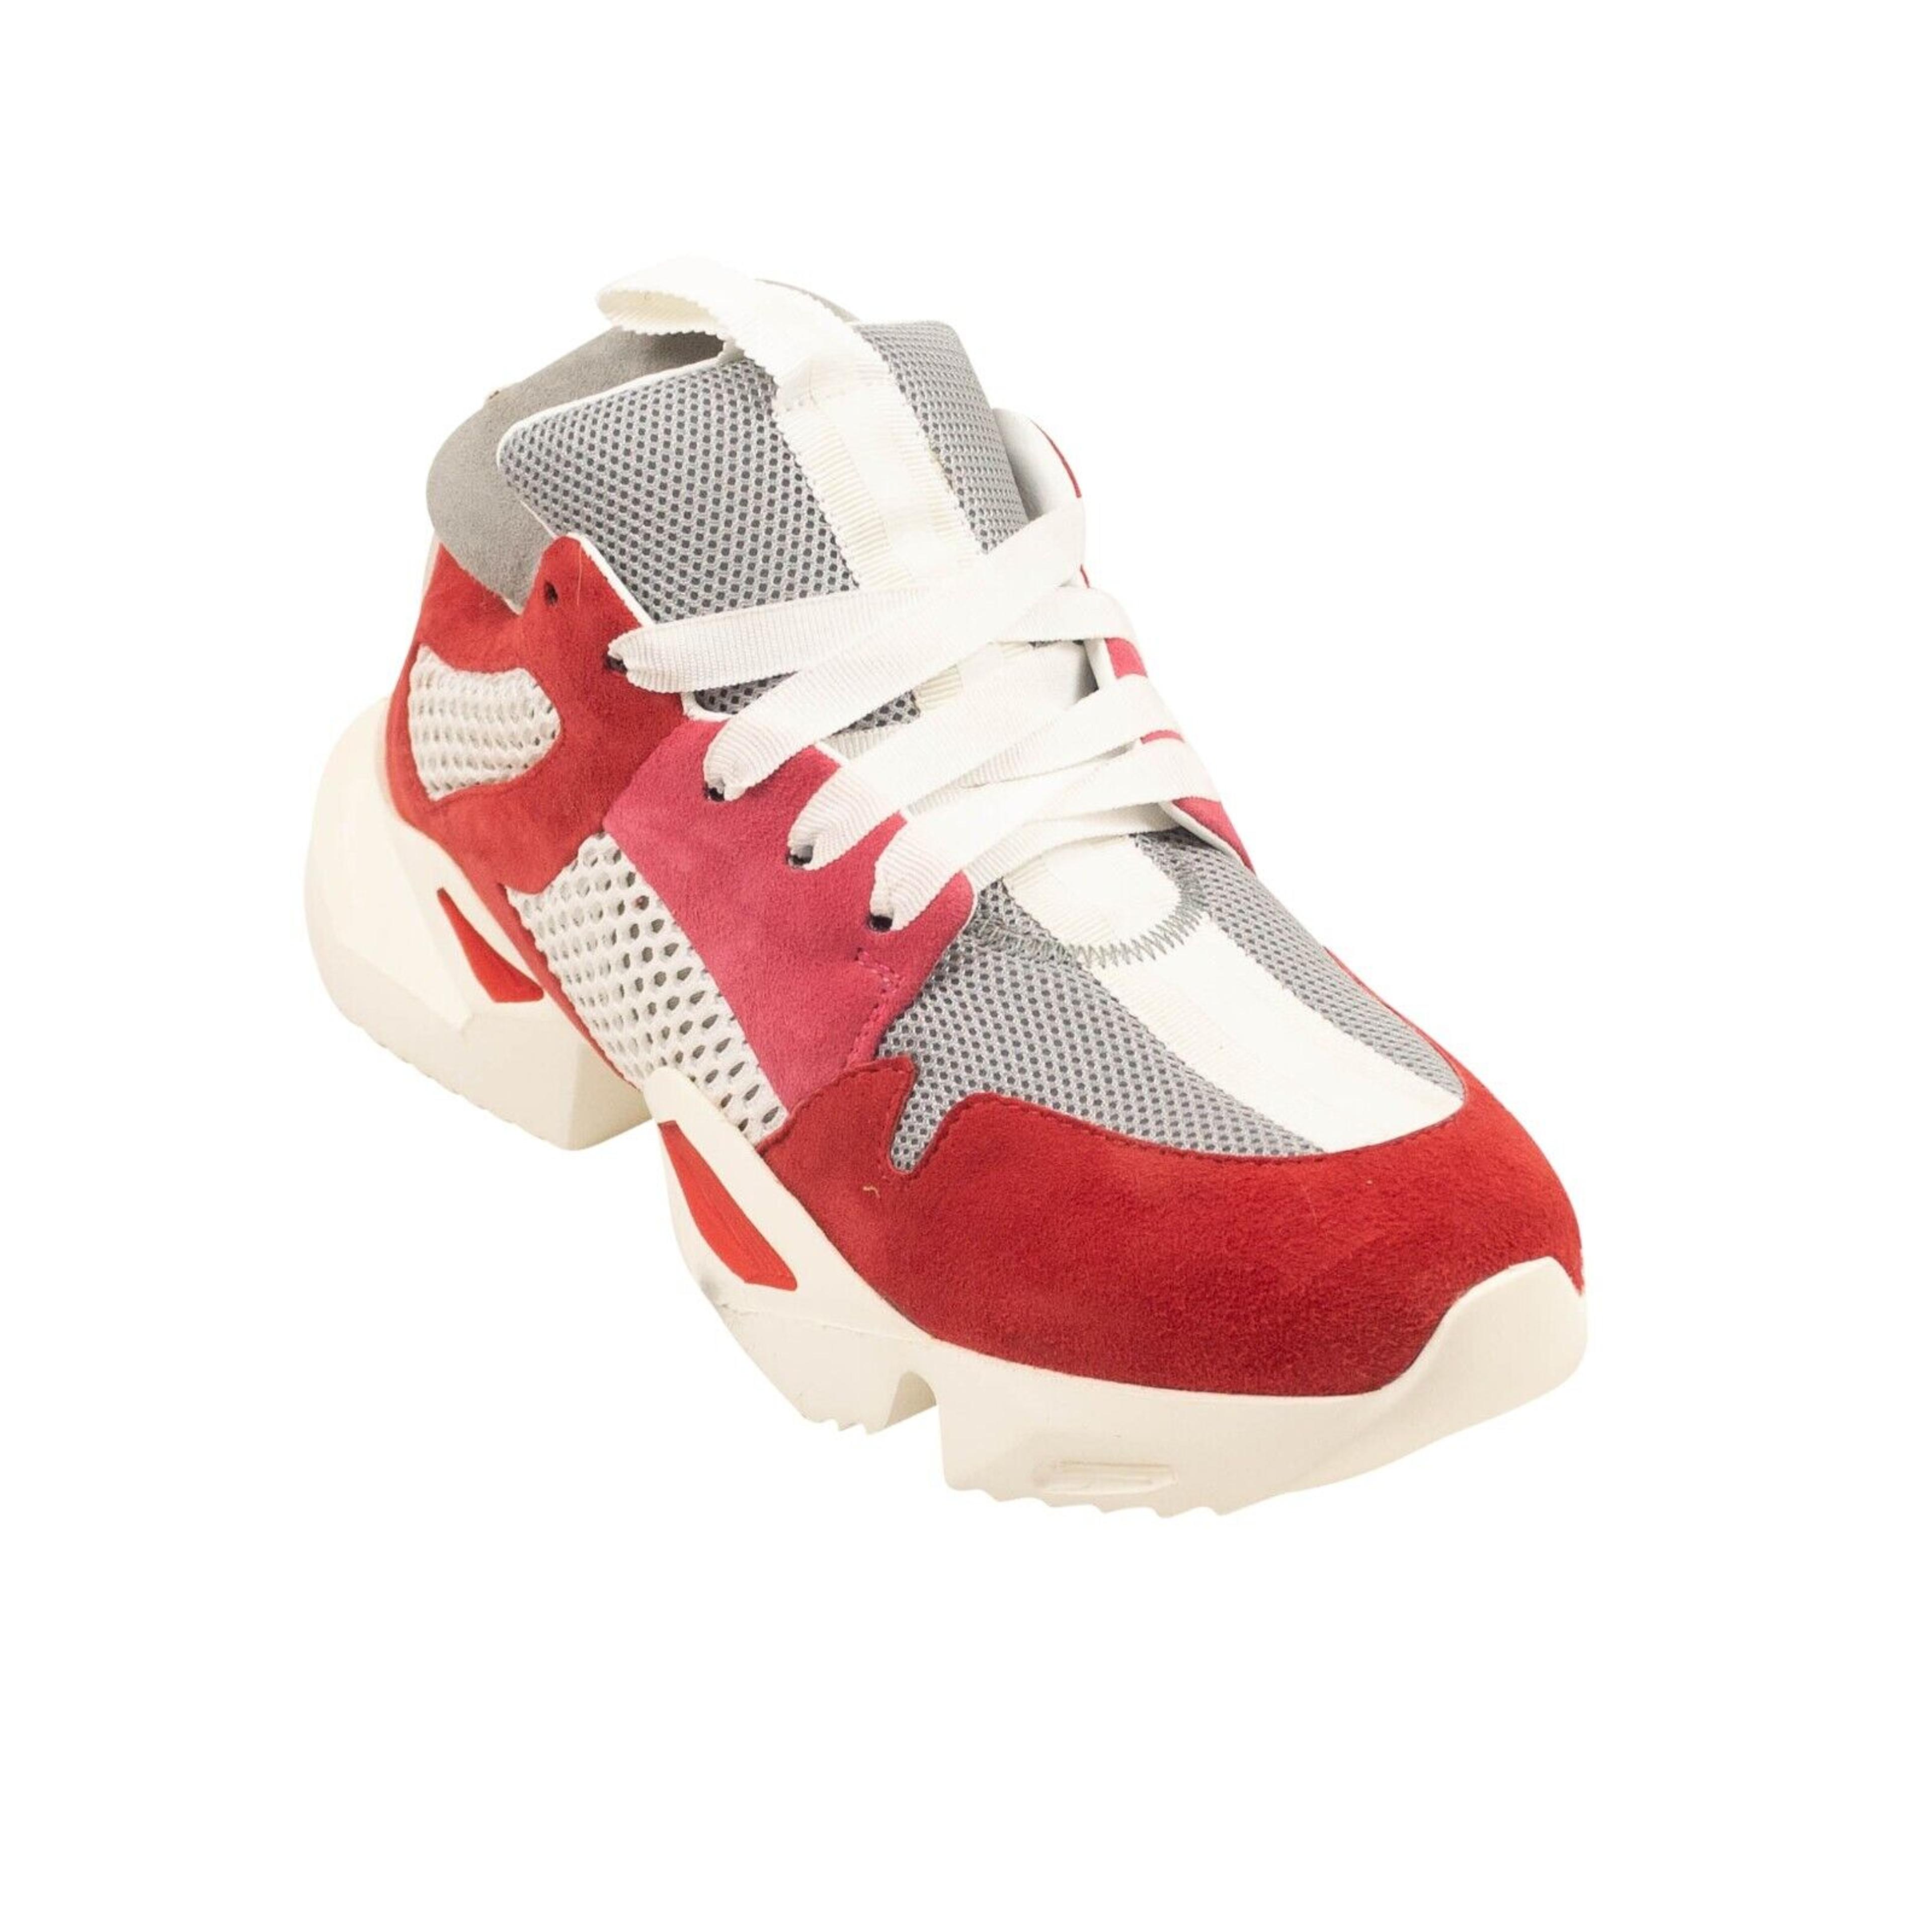 Alternate View 2 of Unravel Project Mesh Suede Sneakers - Red/Pink/Gray